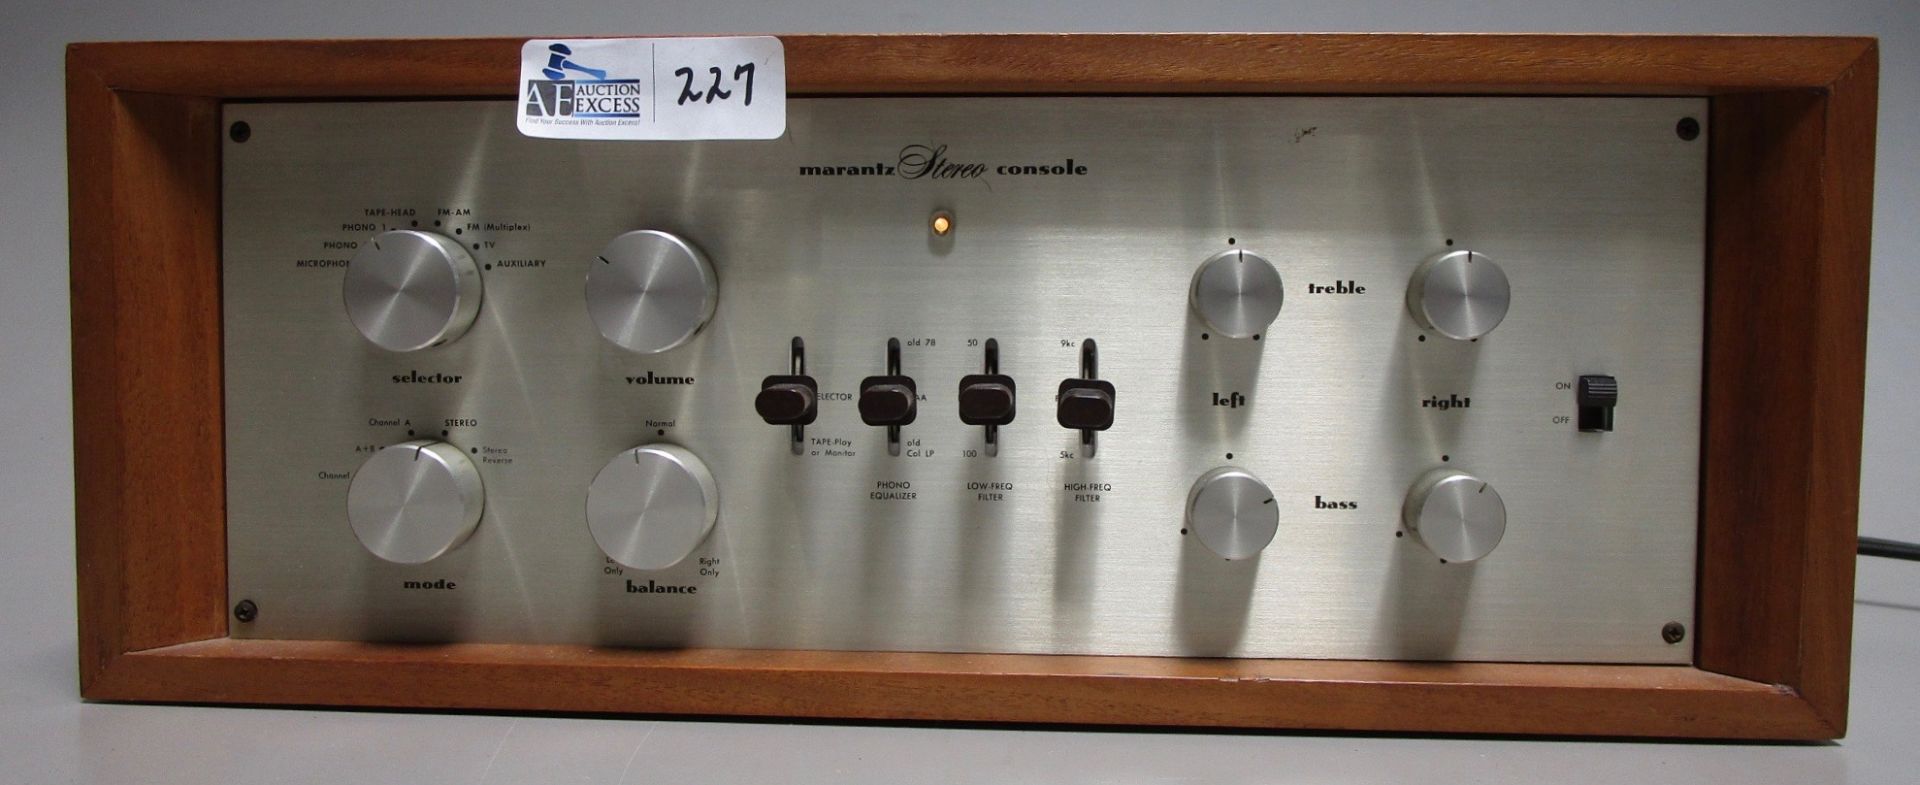 MARANTZ STEREO CONSOLE MODEL 7 TUBE PREAMP TESTED AND WORKING WITH VINTAGE TELEFUNKEN 12AX7 TUBES